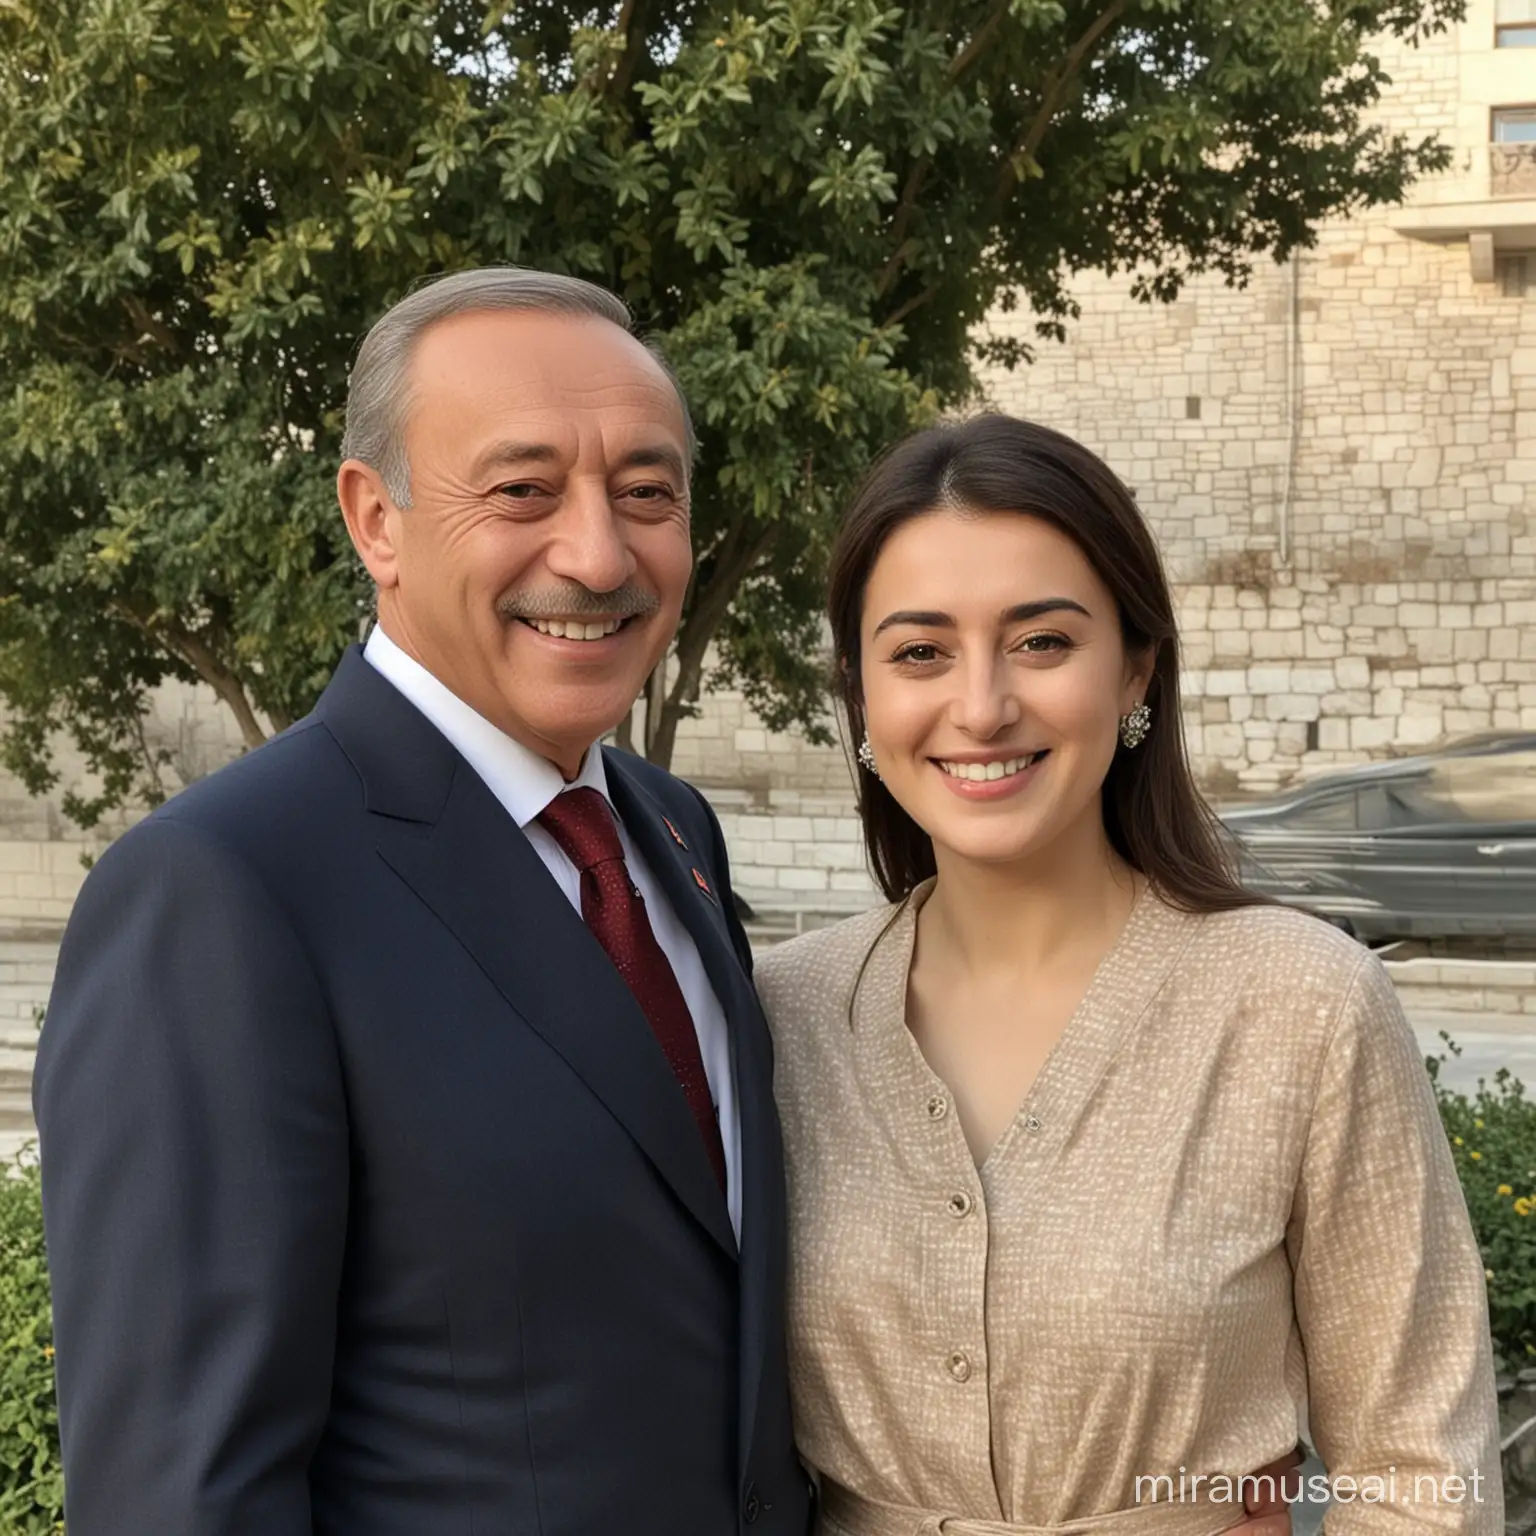 Yılmaz Erdoğan and Cansu Taşkın stand by each other, he and she smiles, he and she look at the camera